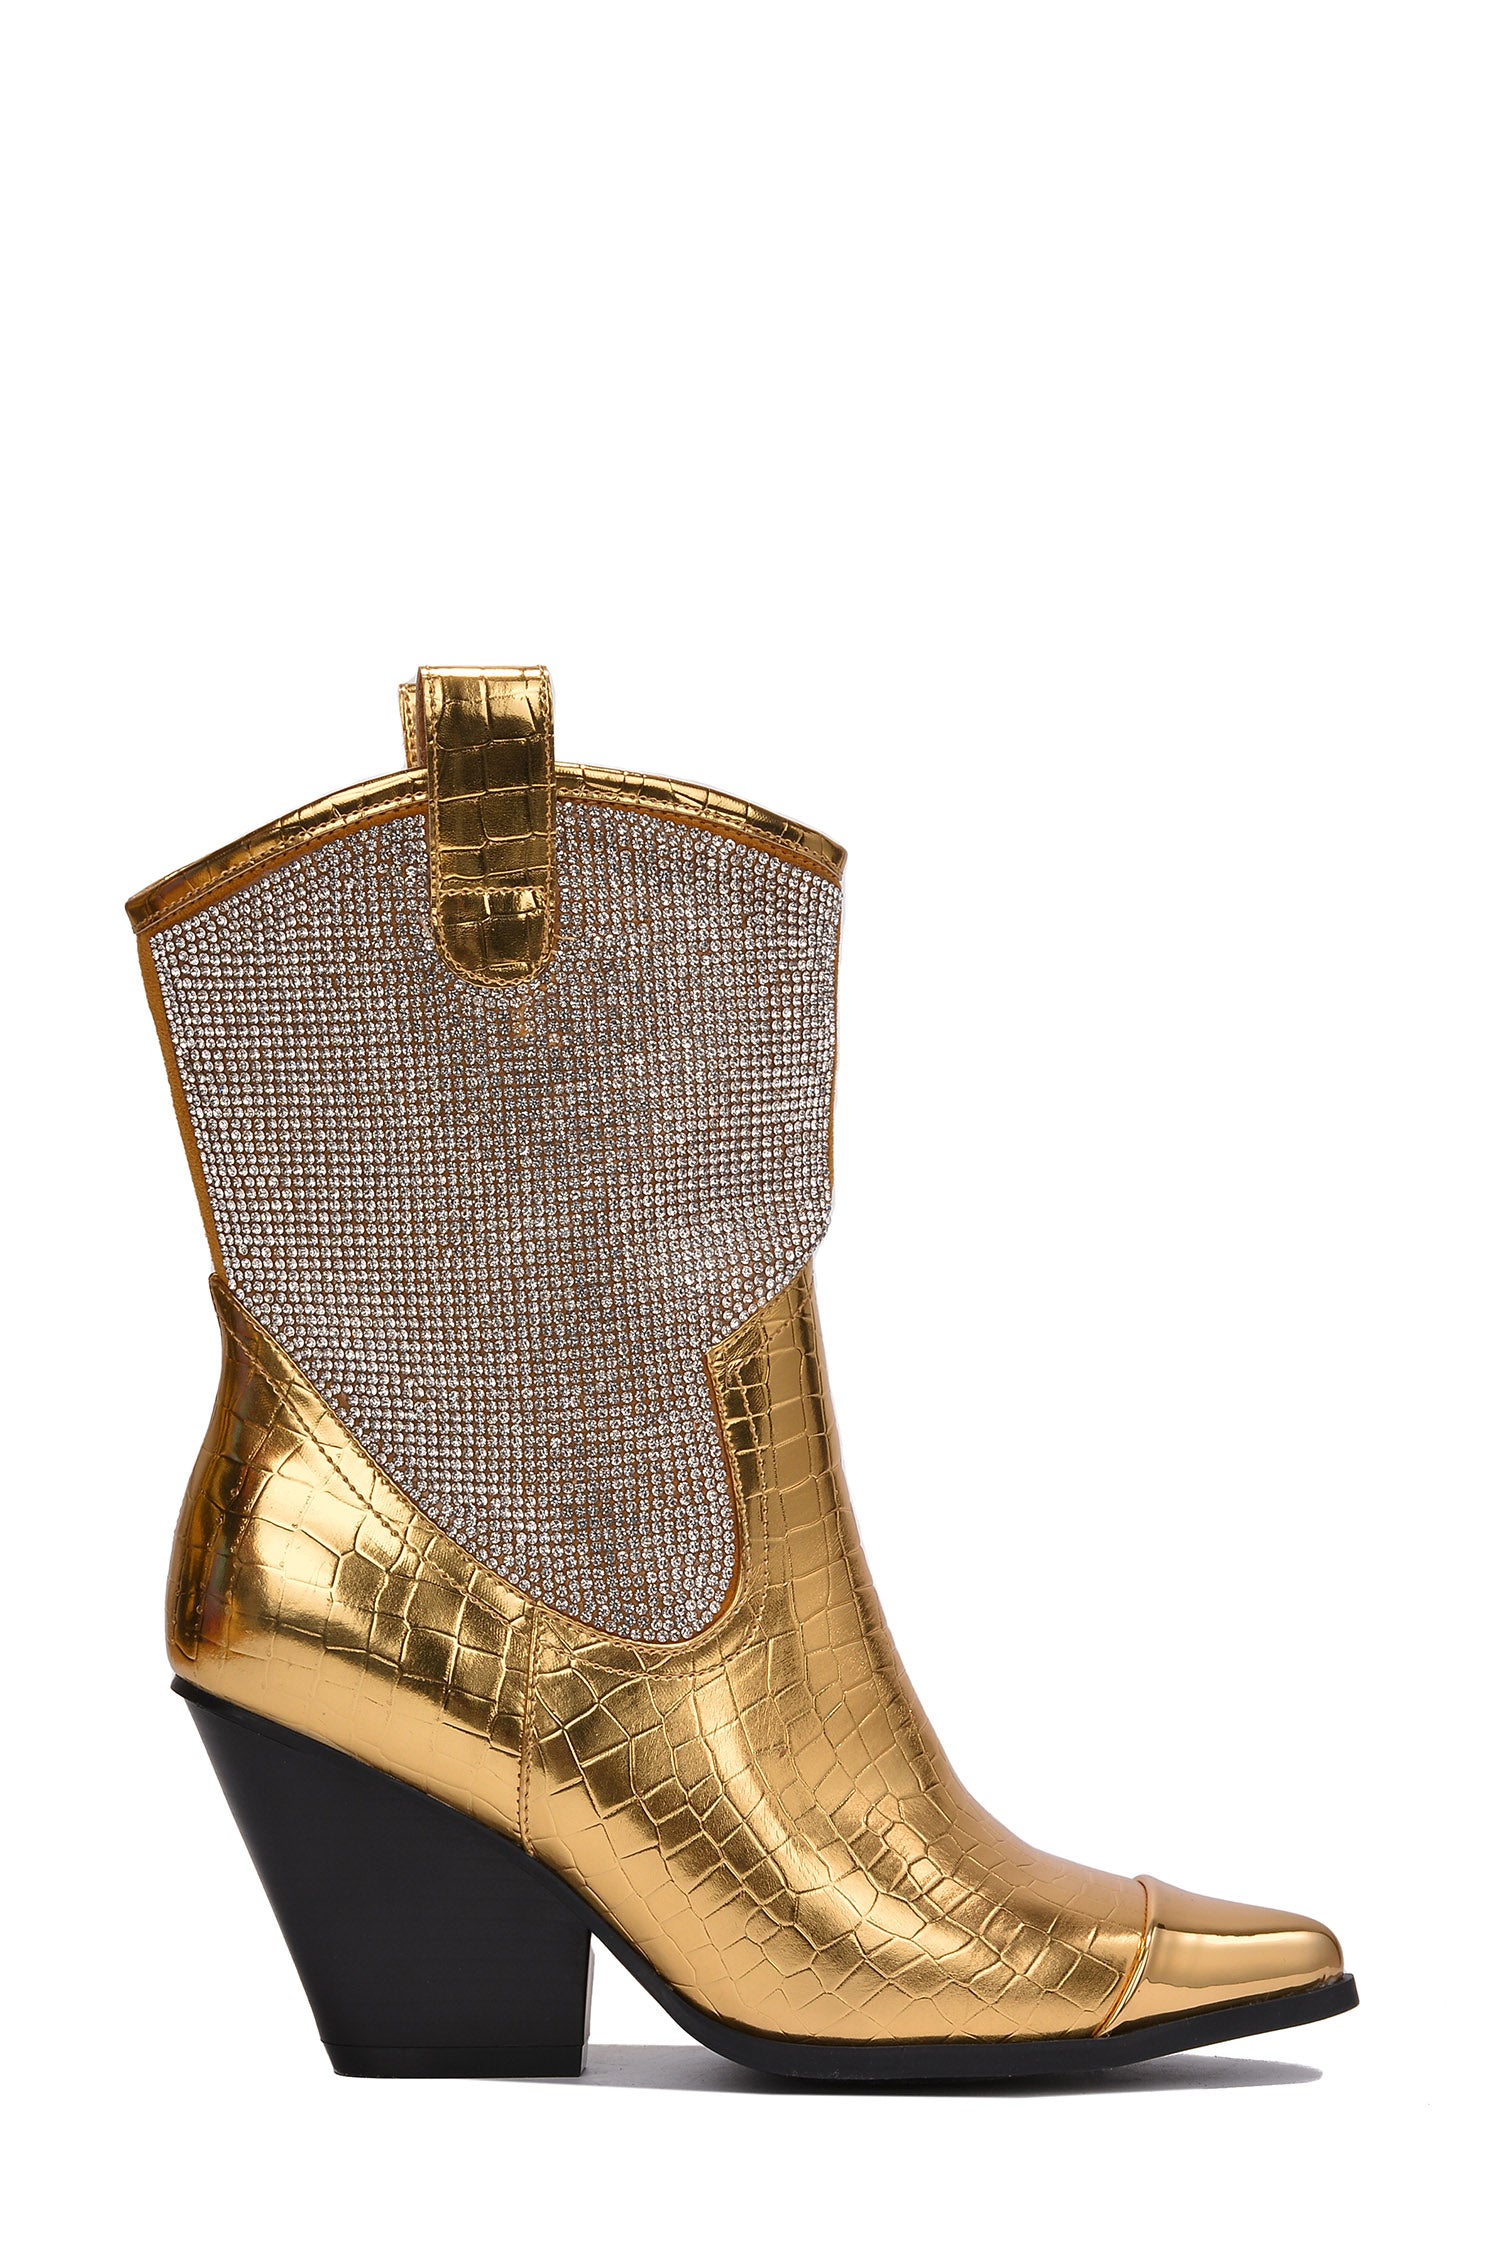 Cape Robbin - ZEPHYR - GOLD - BOOTS